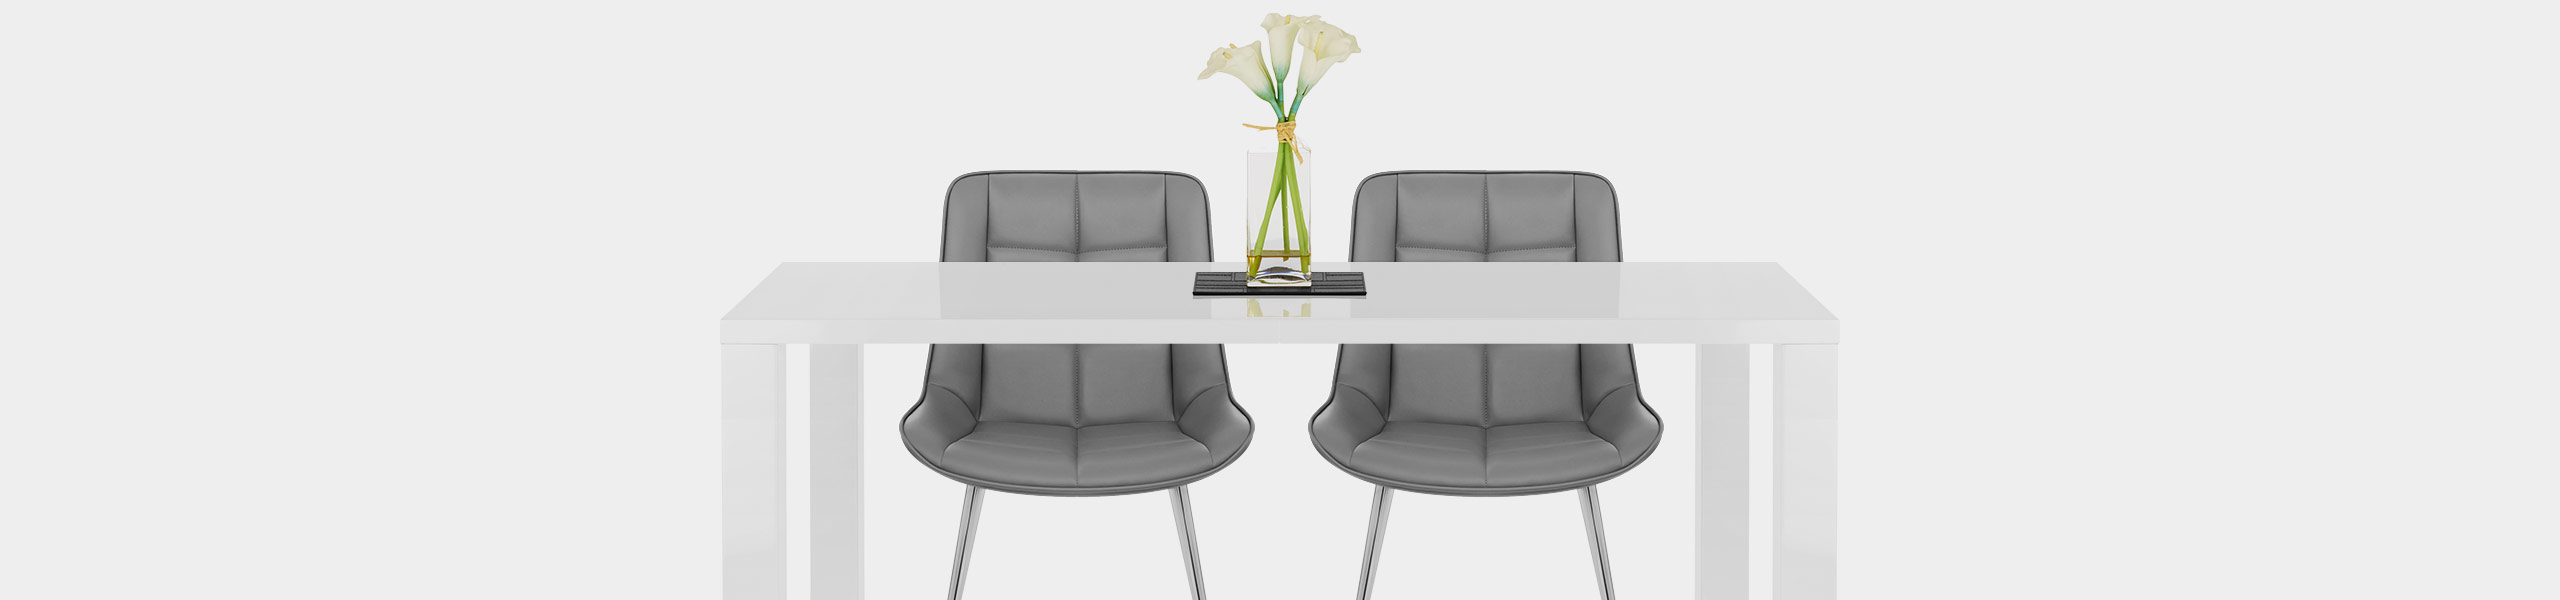 Milano Dining Chair Grey Video Banner